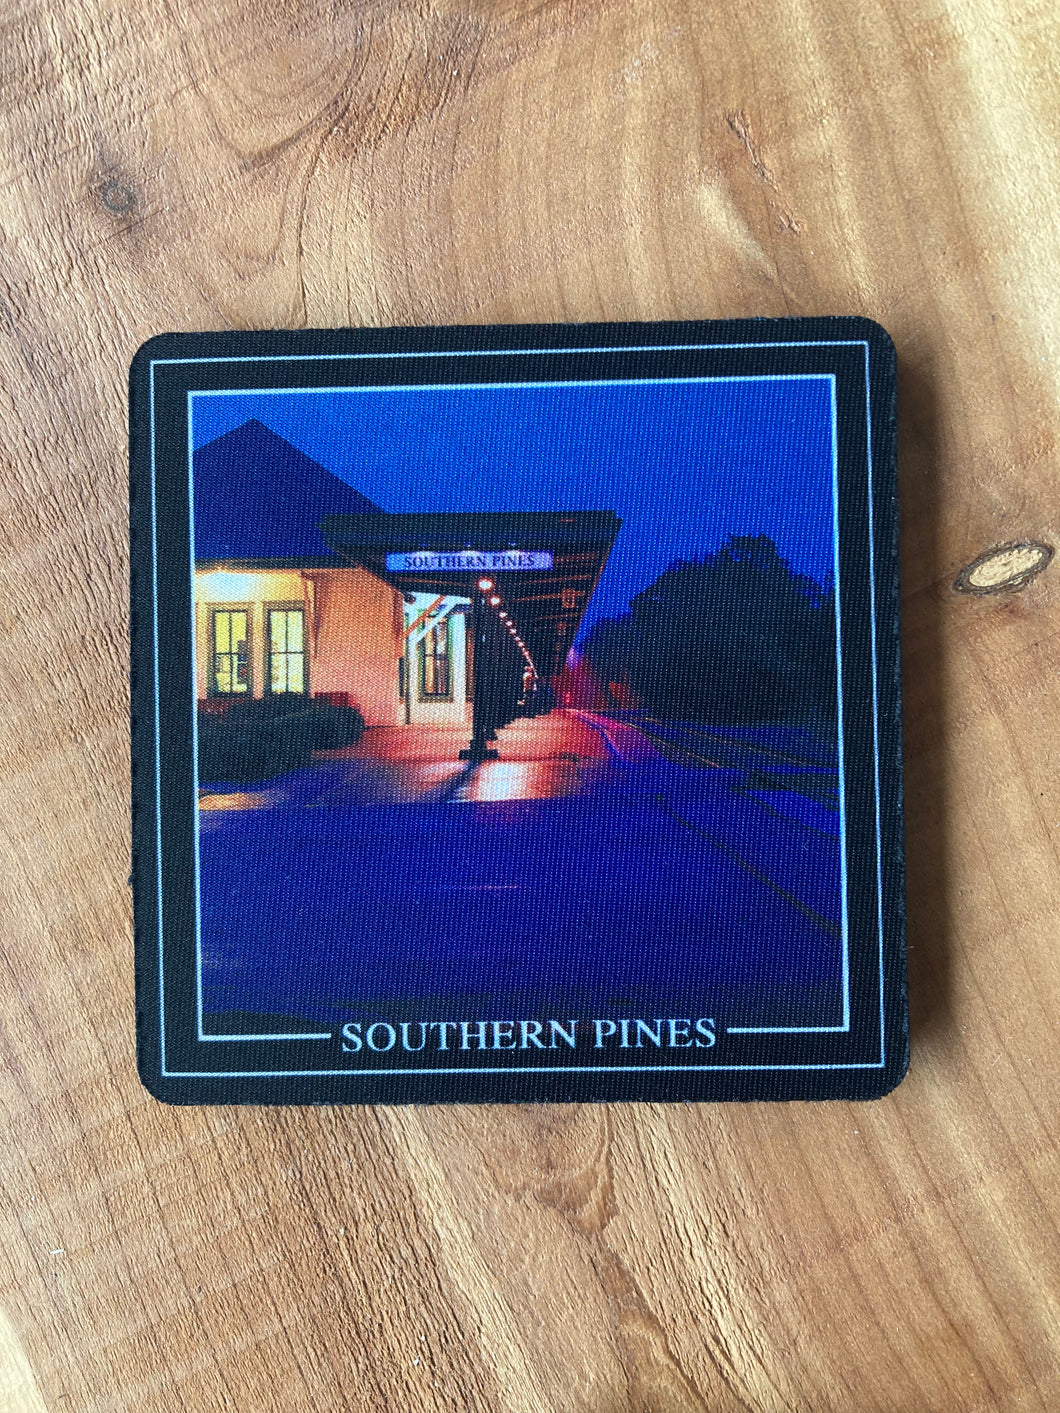 Southern Pines Coaster